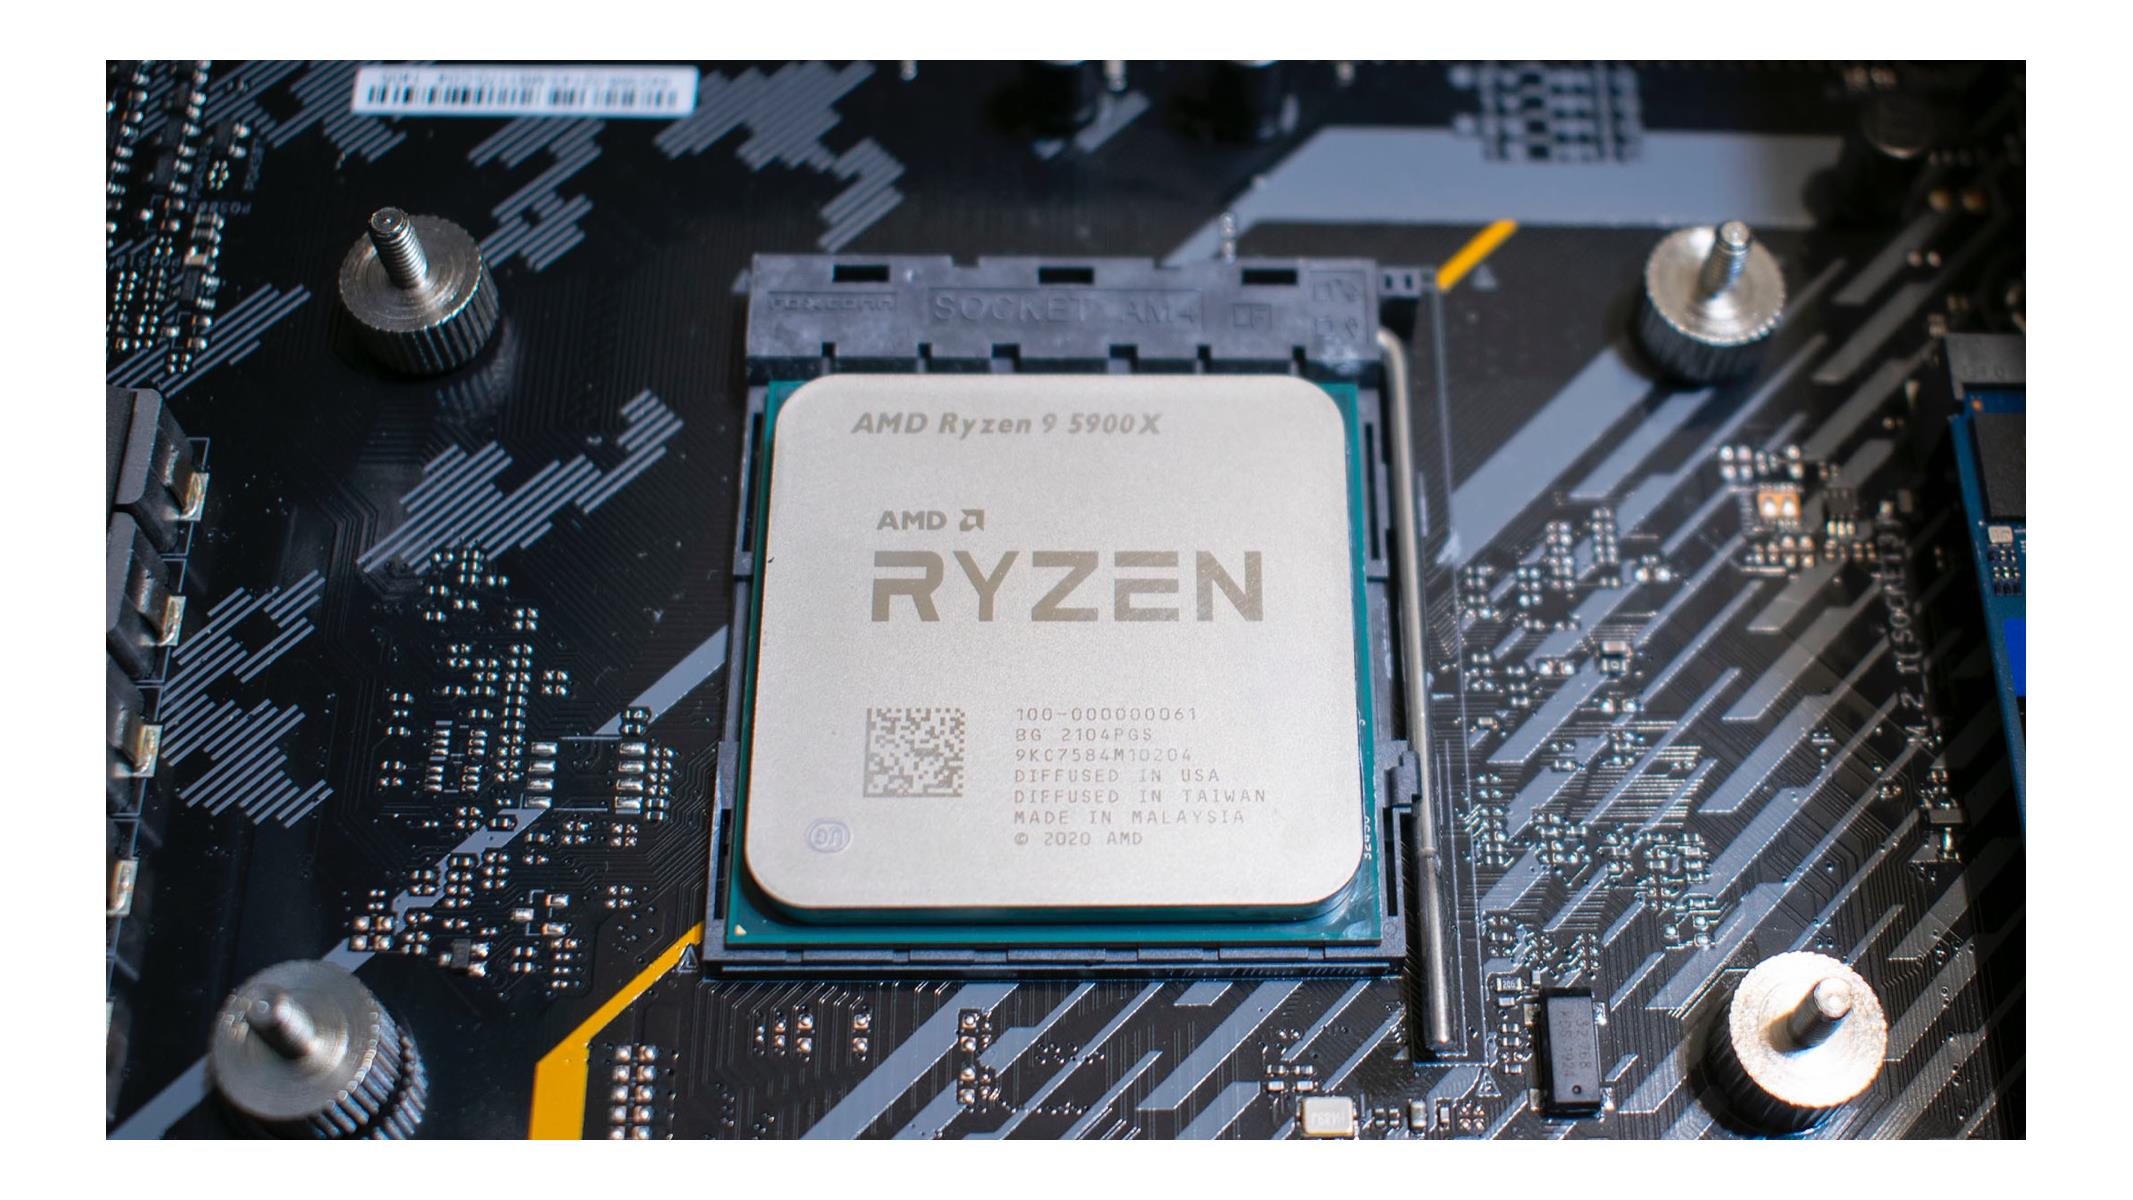 Is the AMD Ryzen 9 5900X good for gaming?